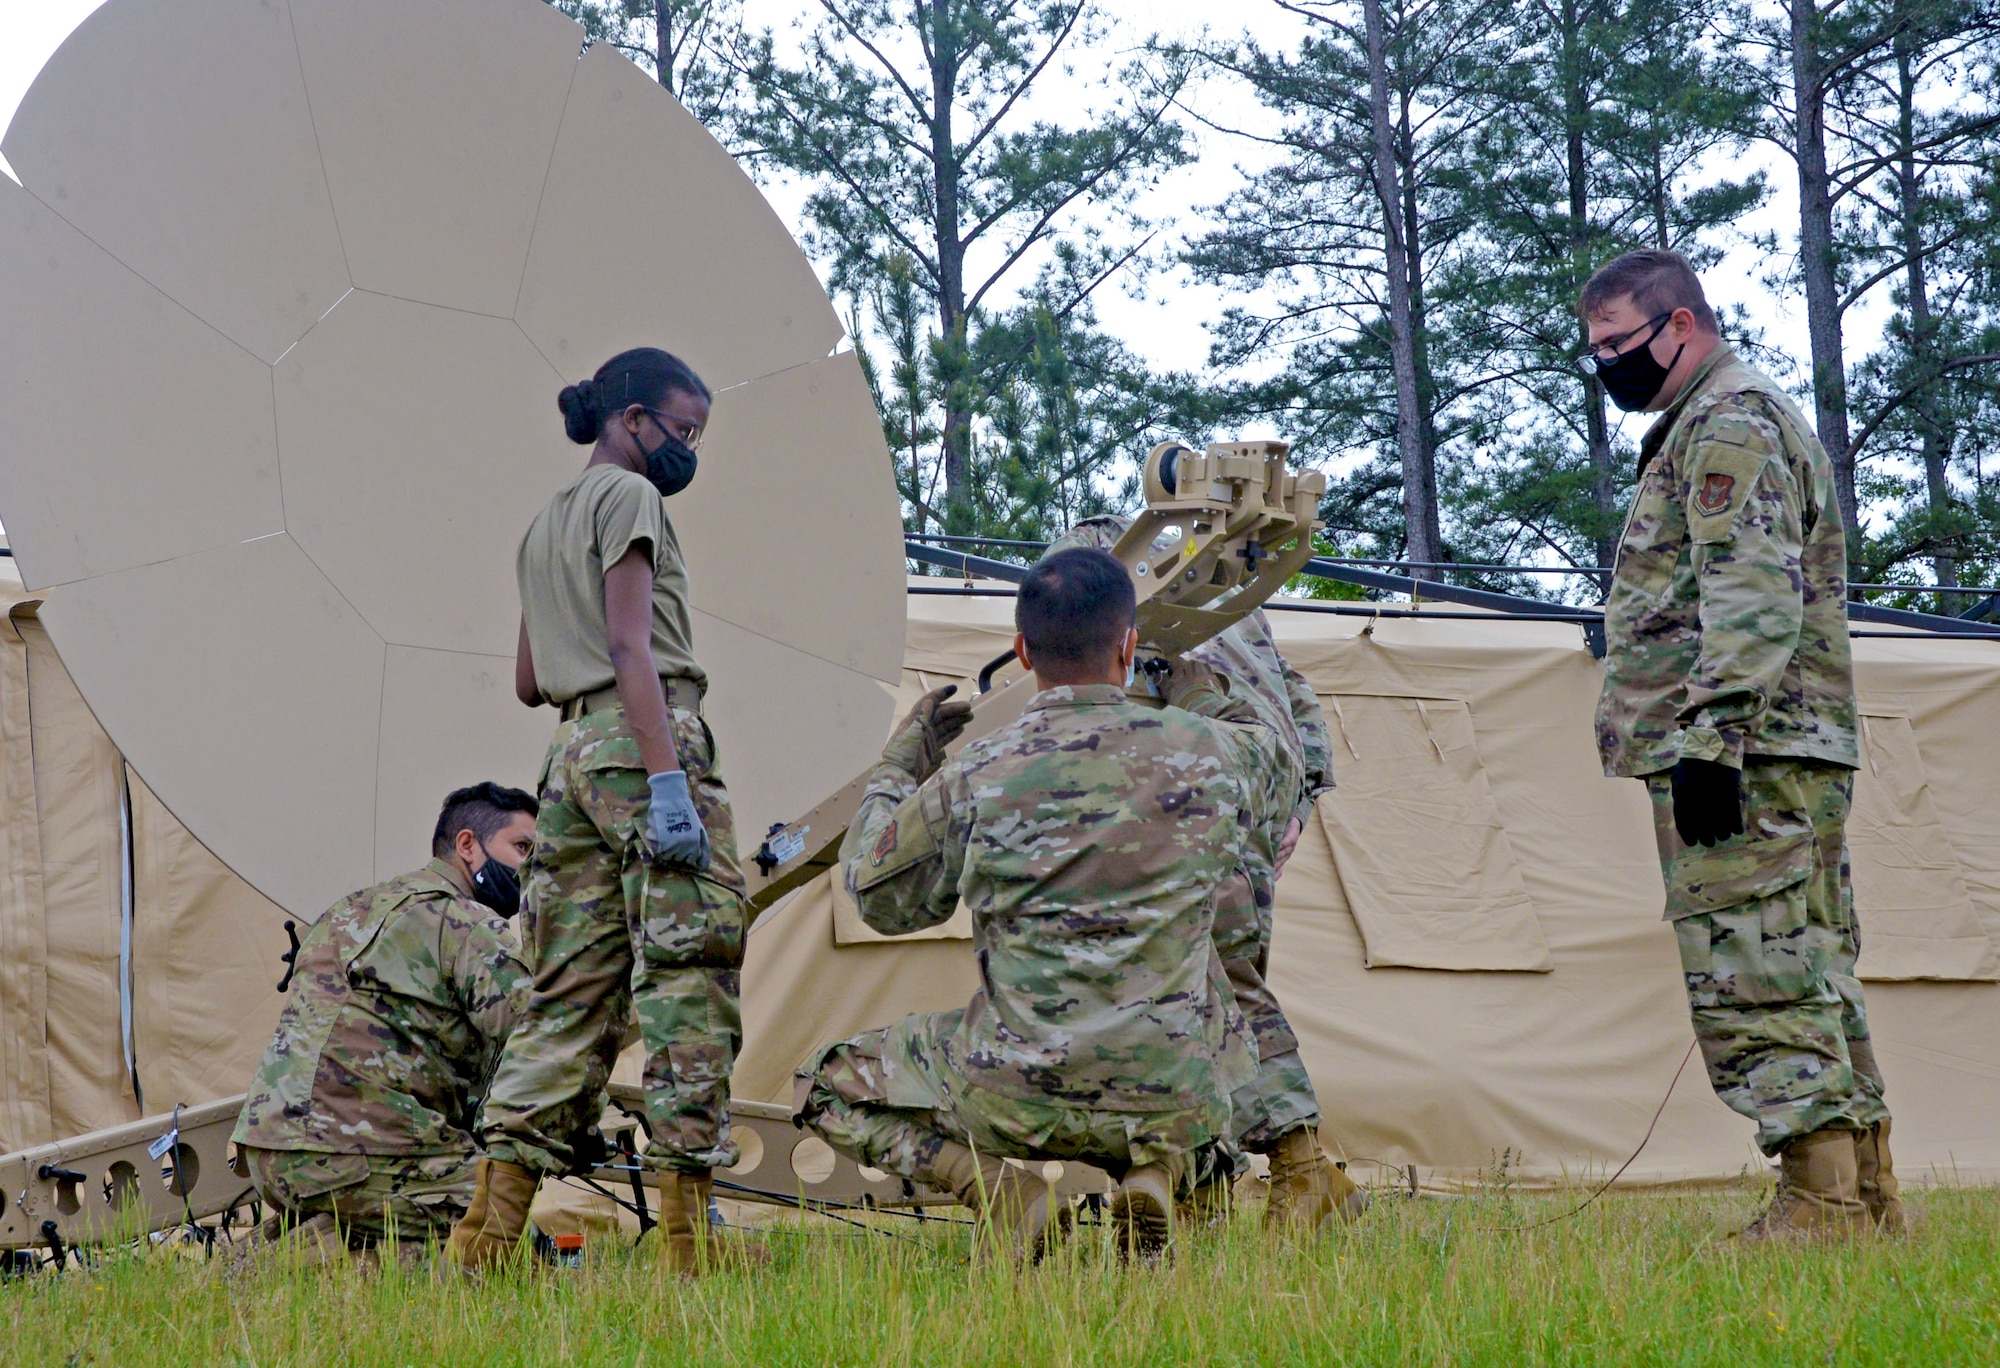 Combat communications Reserve Citizen Airmen dismantle a satellite April 29, 2021, at Robins Air Force Base, Georgia. The Airmen participated in the Total Force Expeditionary Communications Rodeo, which provided an opportunity for units in combat communications across the Air Force to practice their skills in a simulated deployed location. (U.S. Air Force photo by Tech. Sgt. Samantha Mathison)